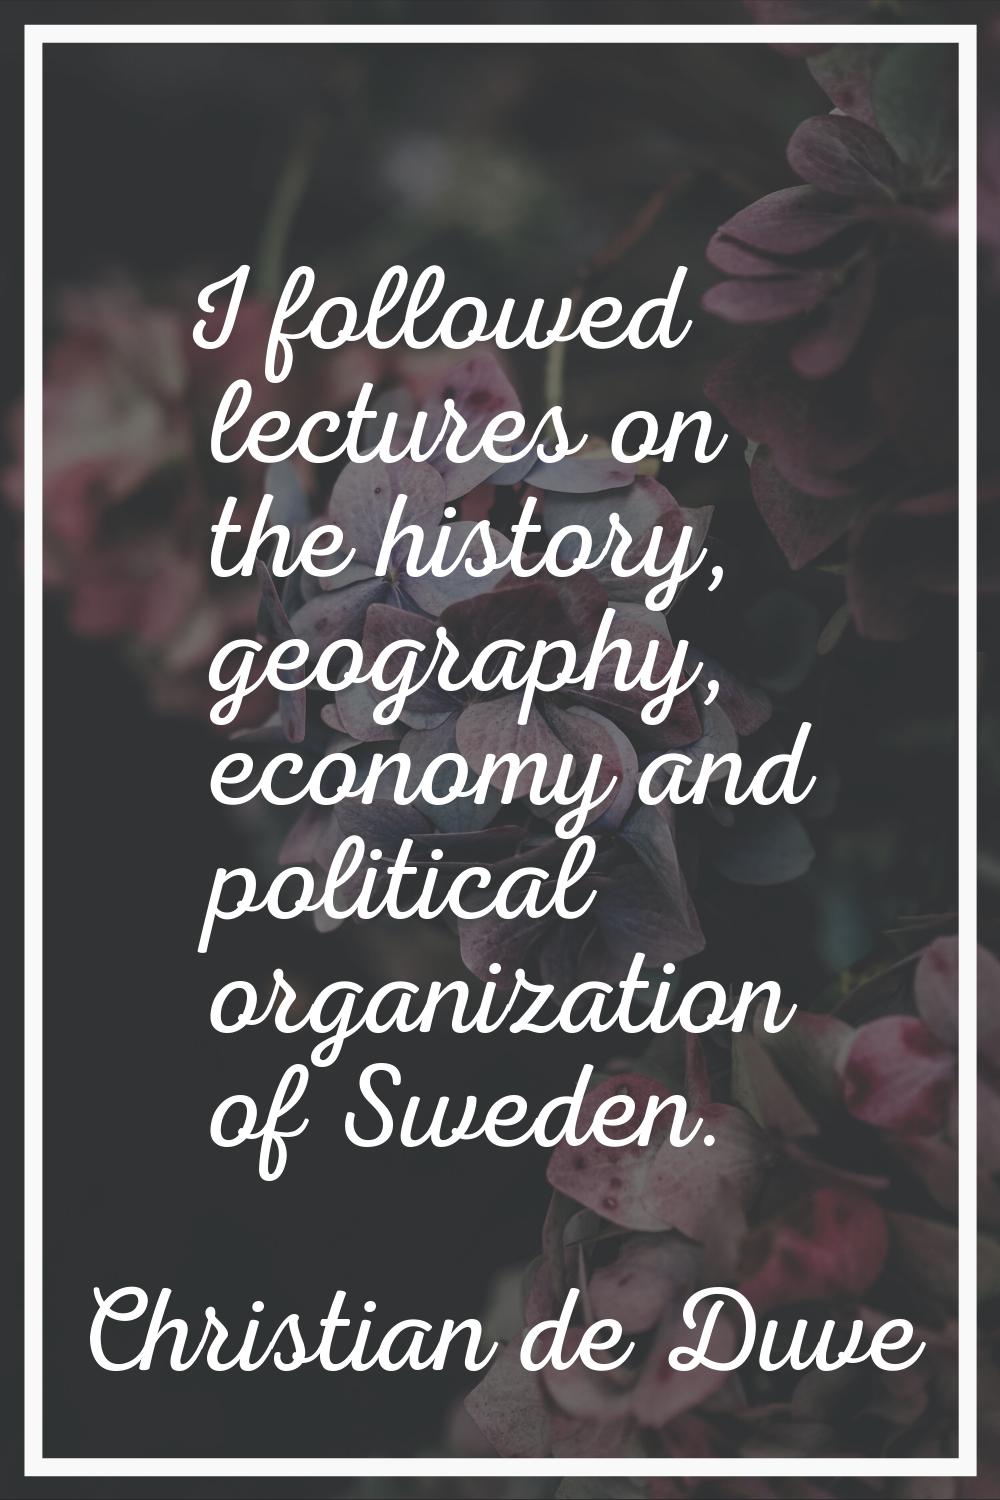 I followed lectures on the history, geography, economy and political organization of Sweden.